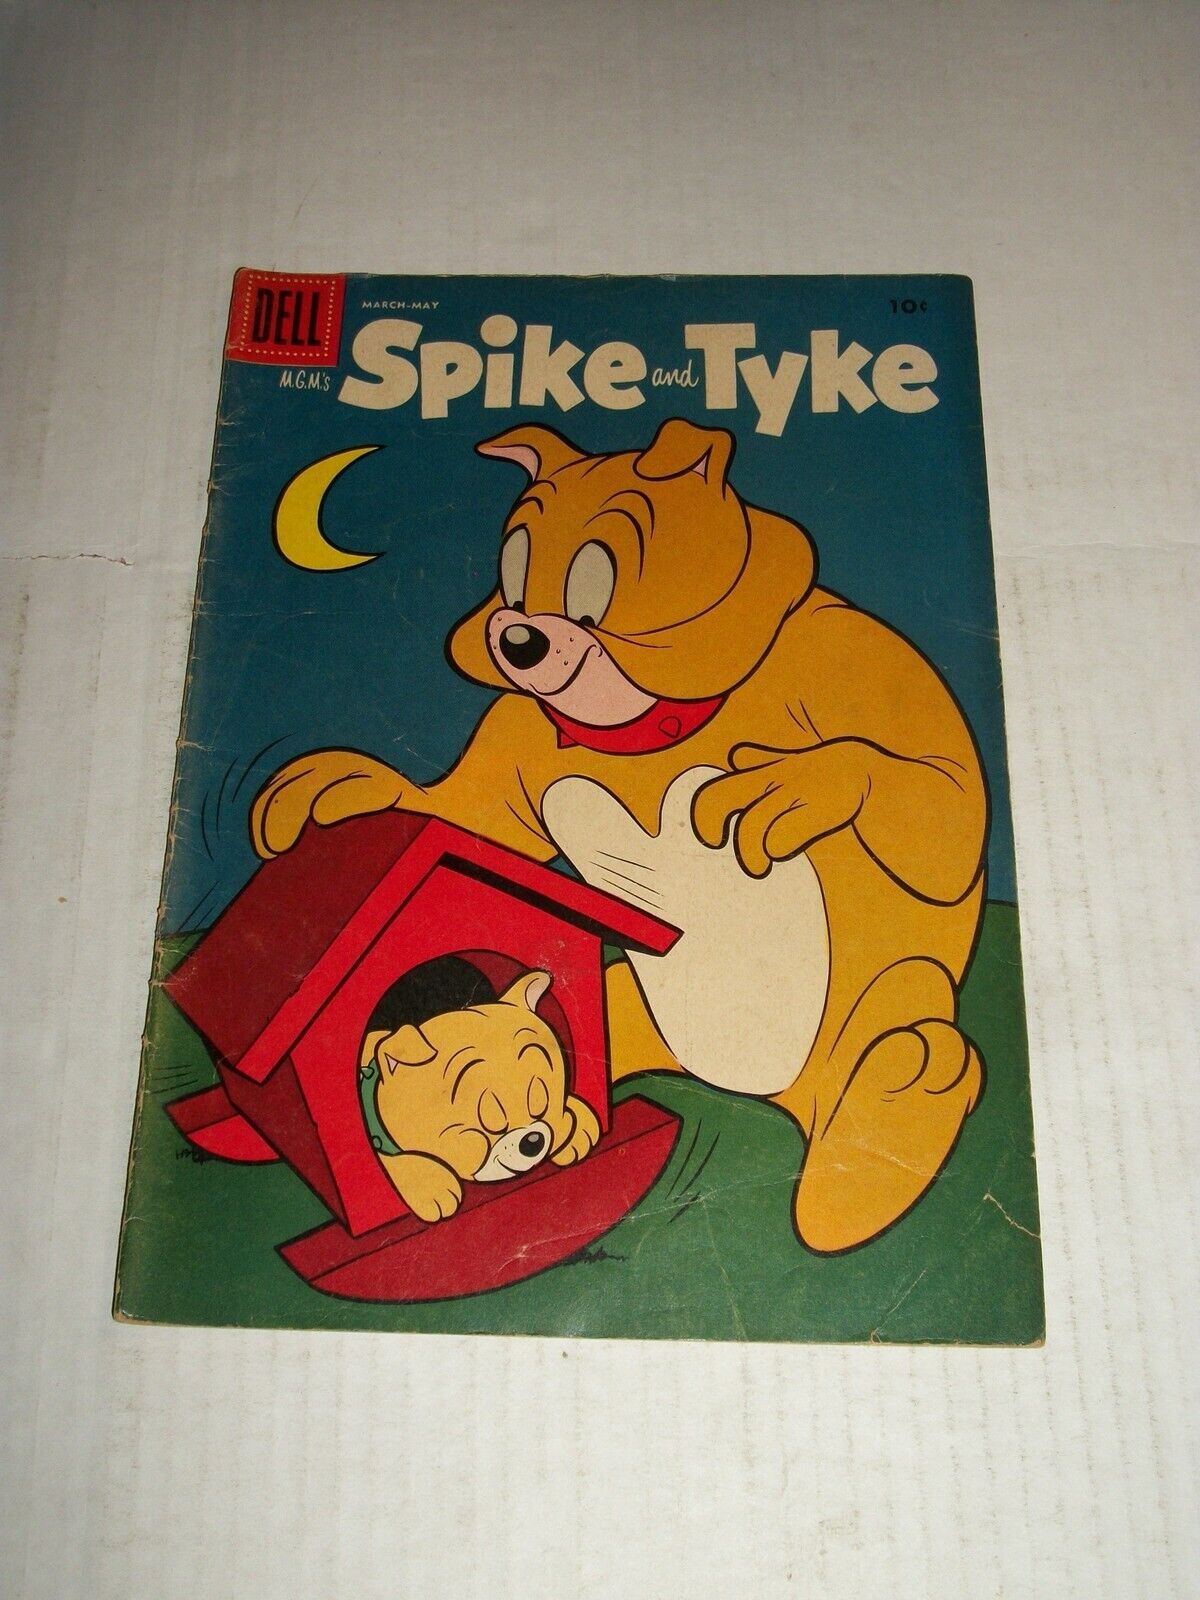 Dell M.G.M.\'S SPIKE AND TYKE #9 March/May 1957